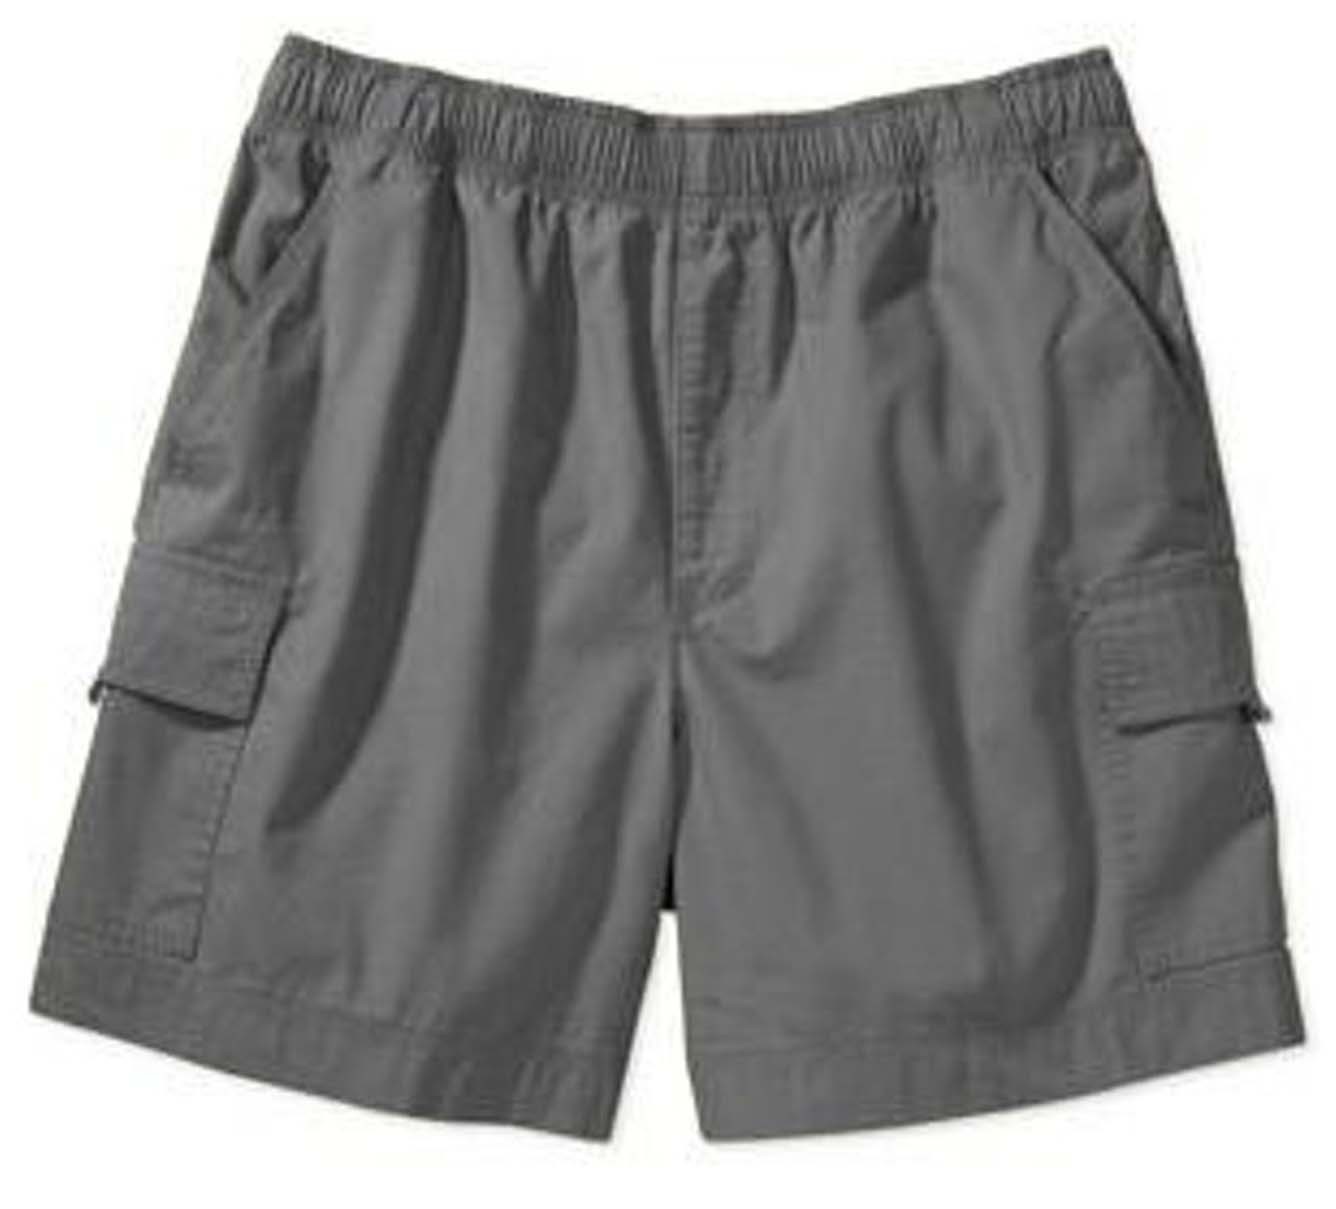 Poplin fabric cargo shorts full elastic waistband  2 side pocket 2 cargo pocket with flap 1 back patch pocket (inseam is 5 inches)